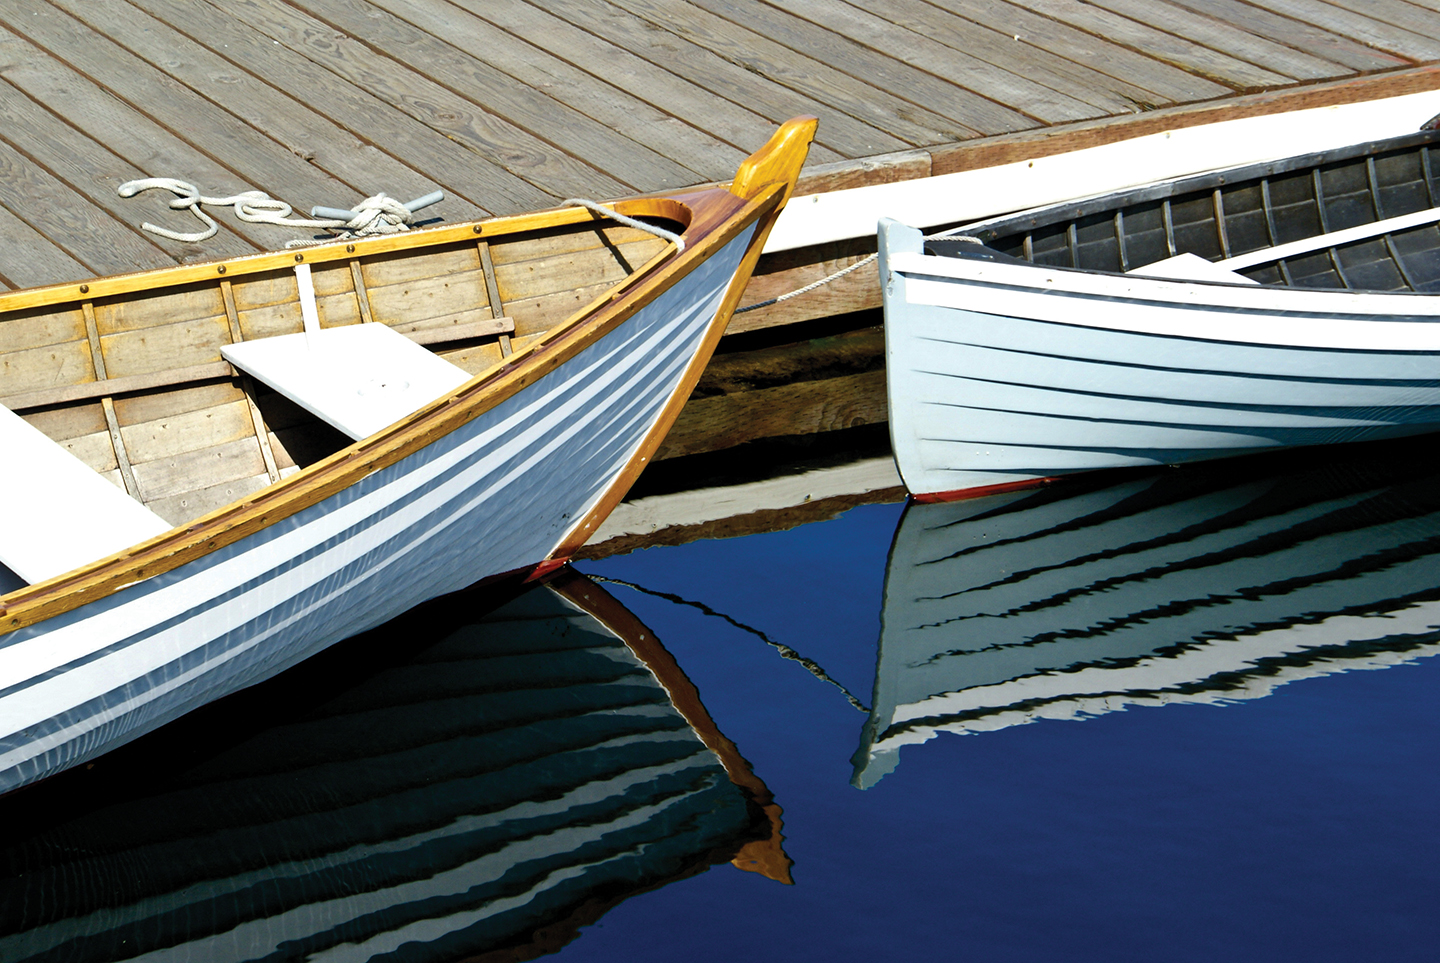 "Two wooden boats floating on the water near a dock"